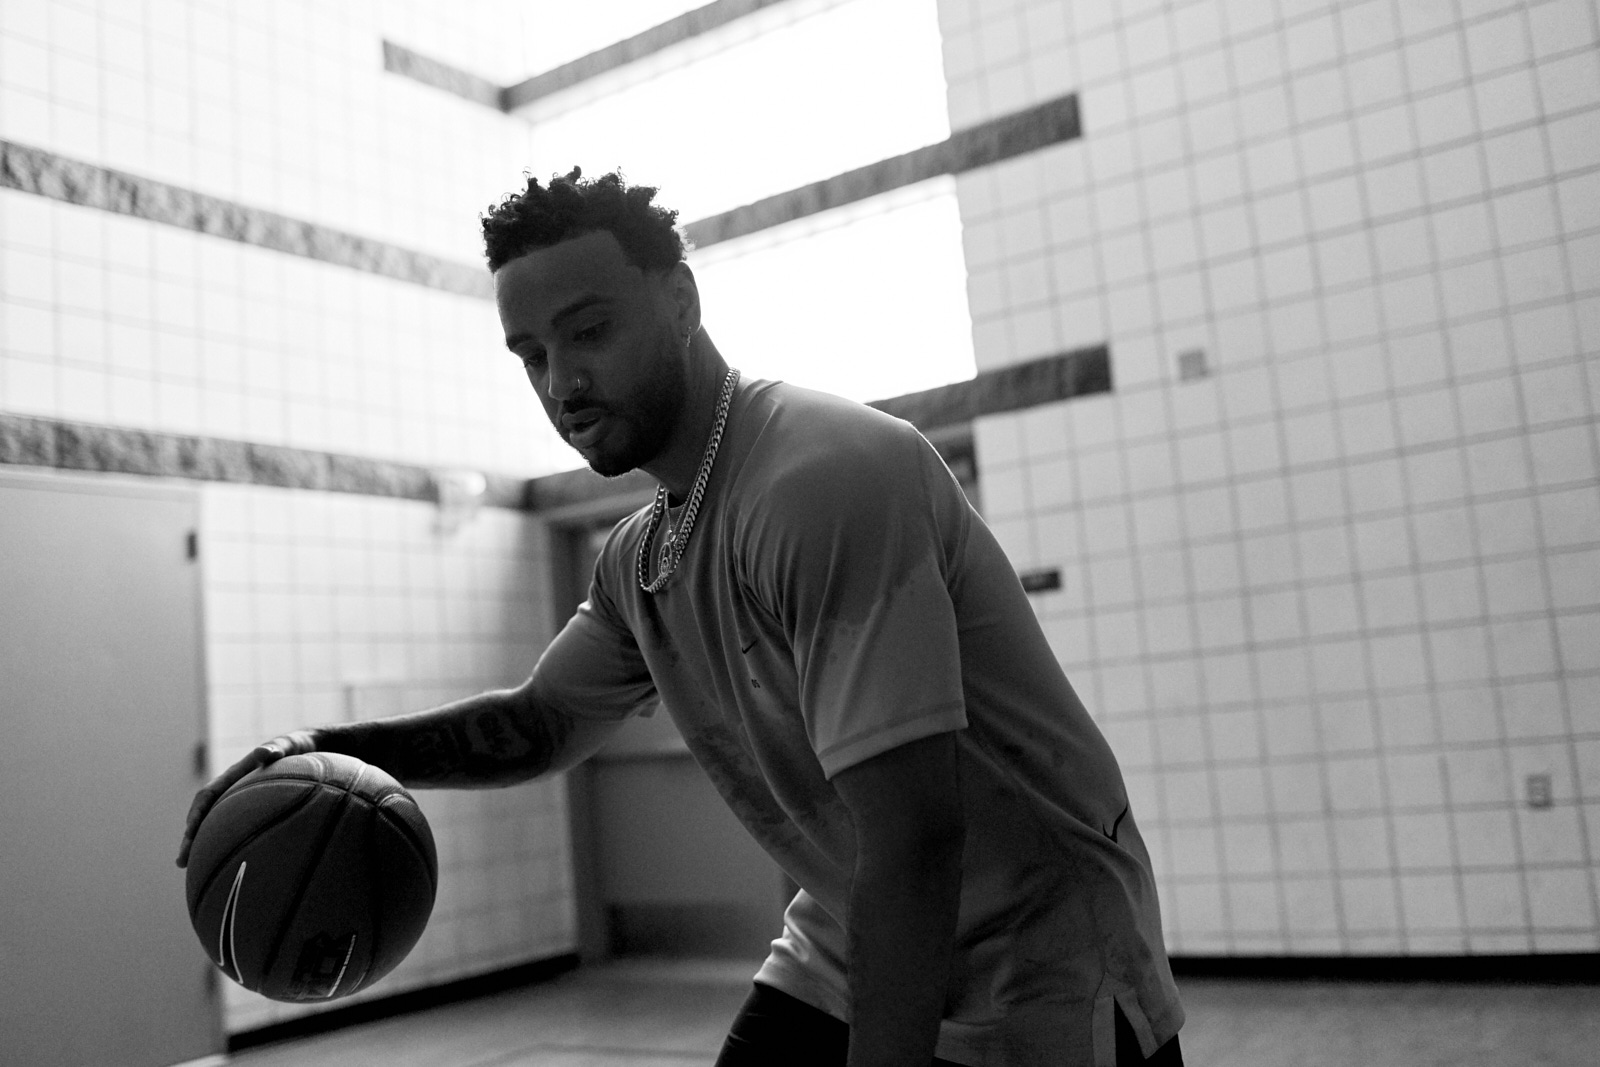 Part of Nike campaign,  Sport Changes Everything, photographed in Los Angeles documenting NBA stylist Brandon Williams basketball training and styling.